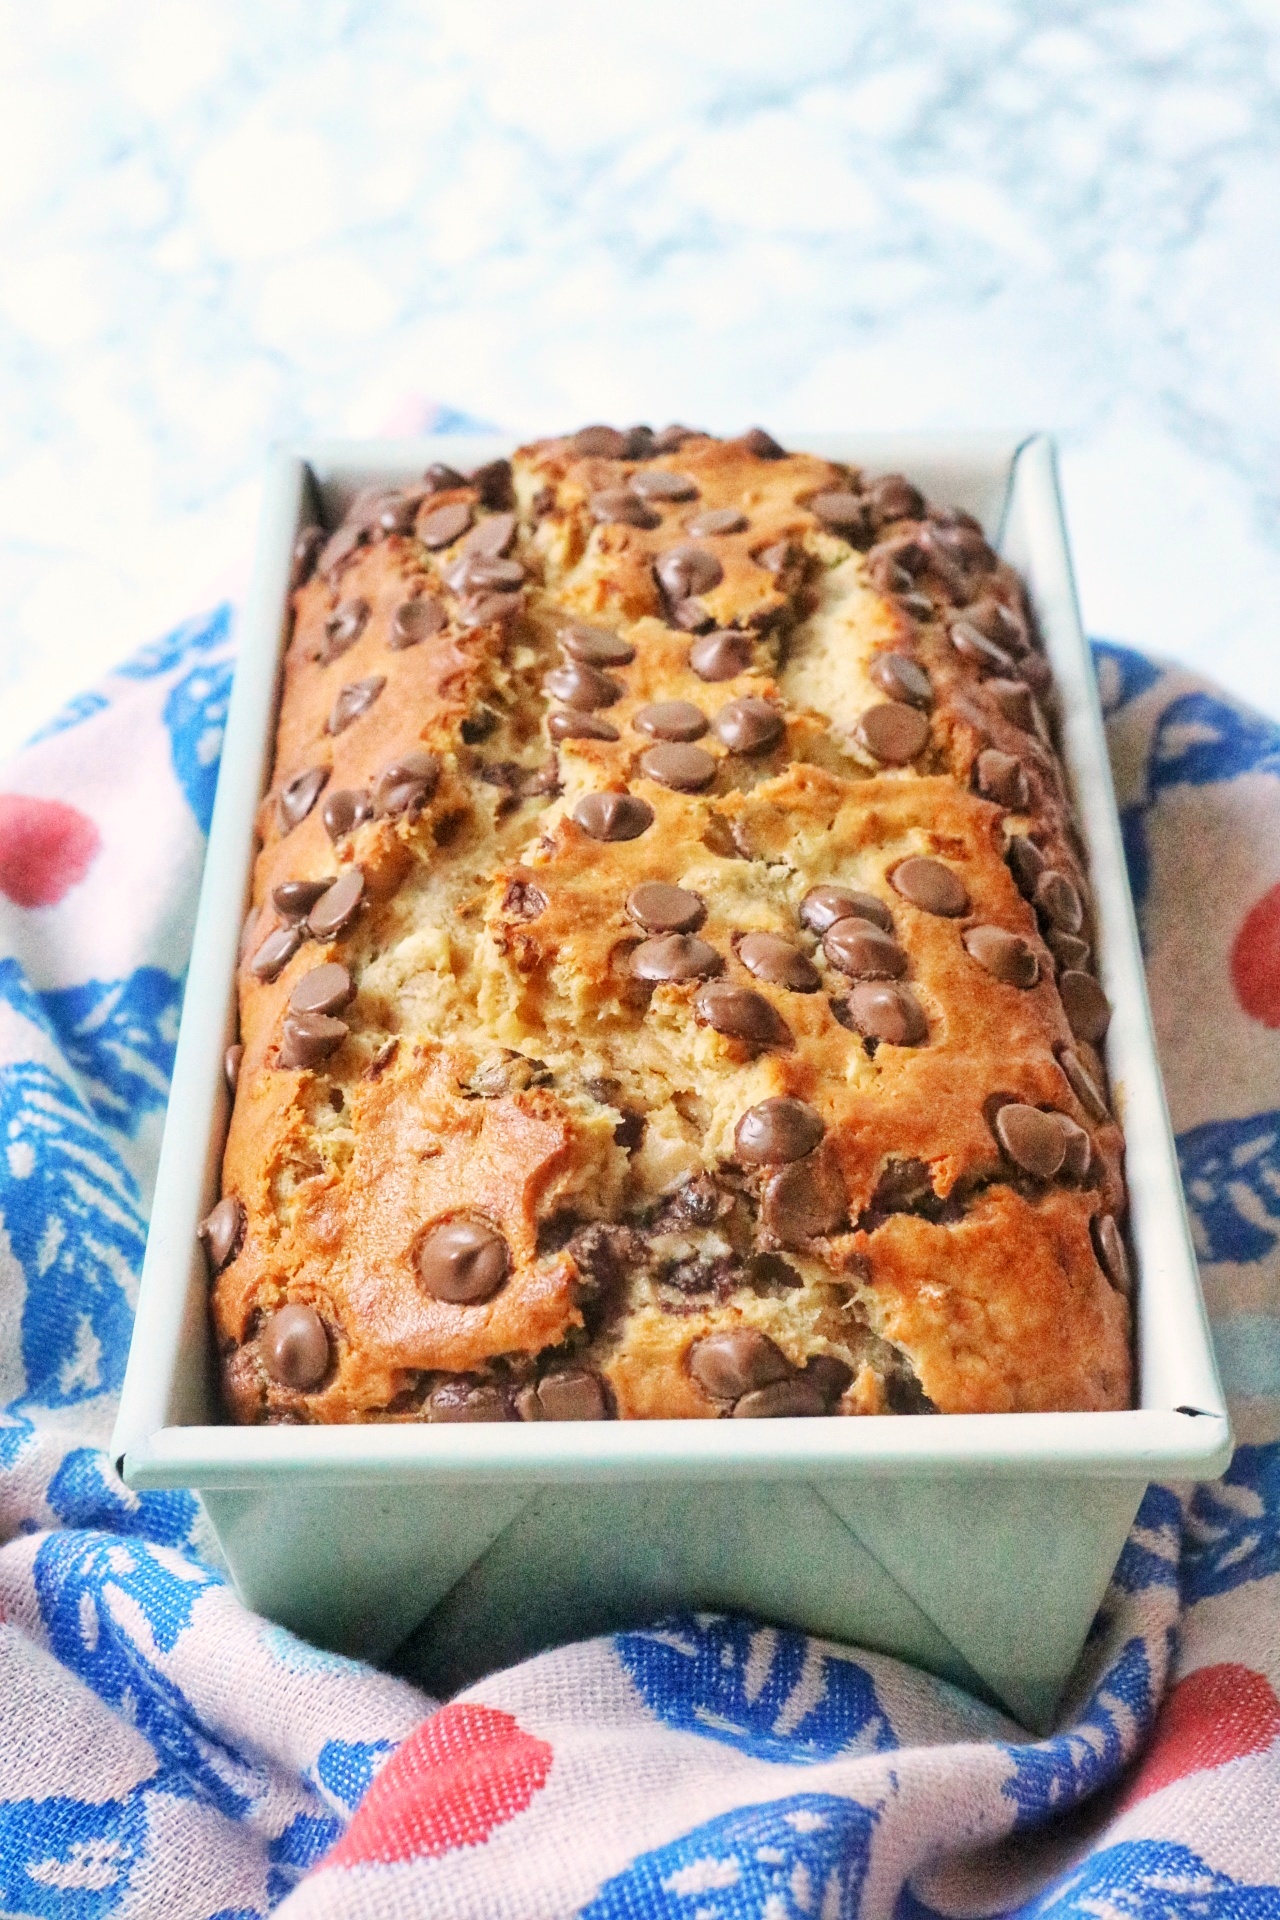 Peanut butter and chocolate chip banana bread